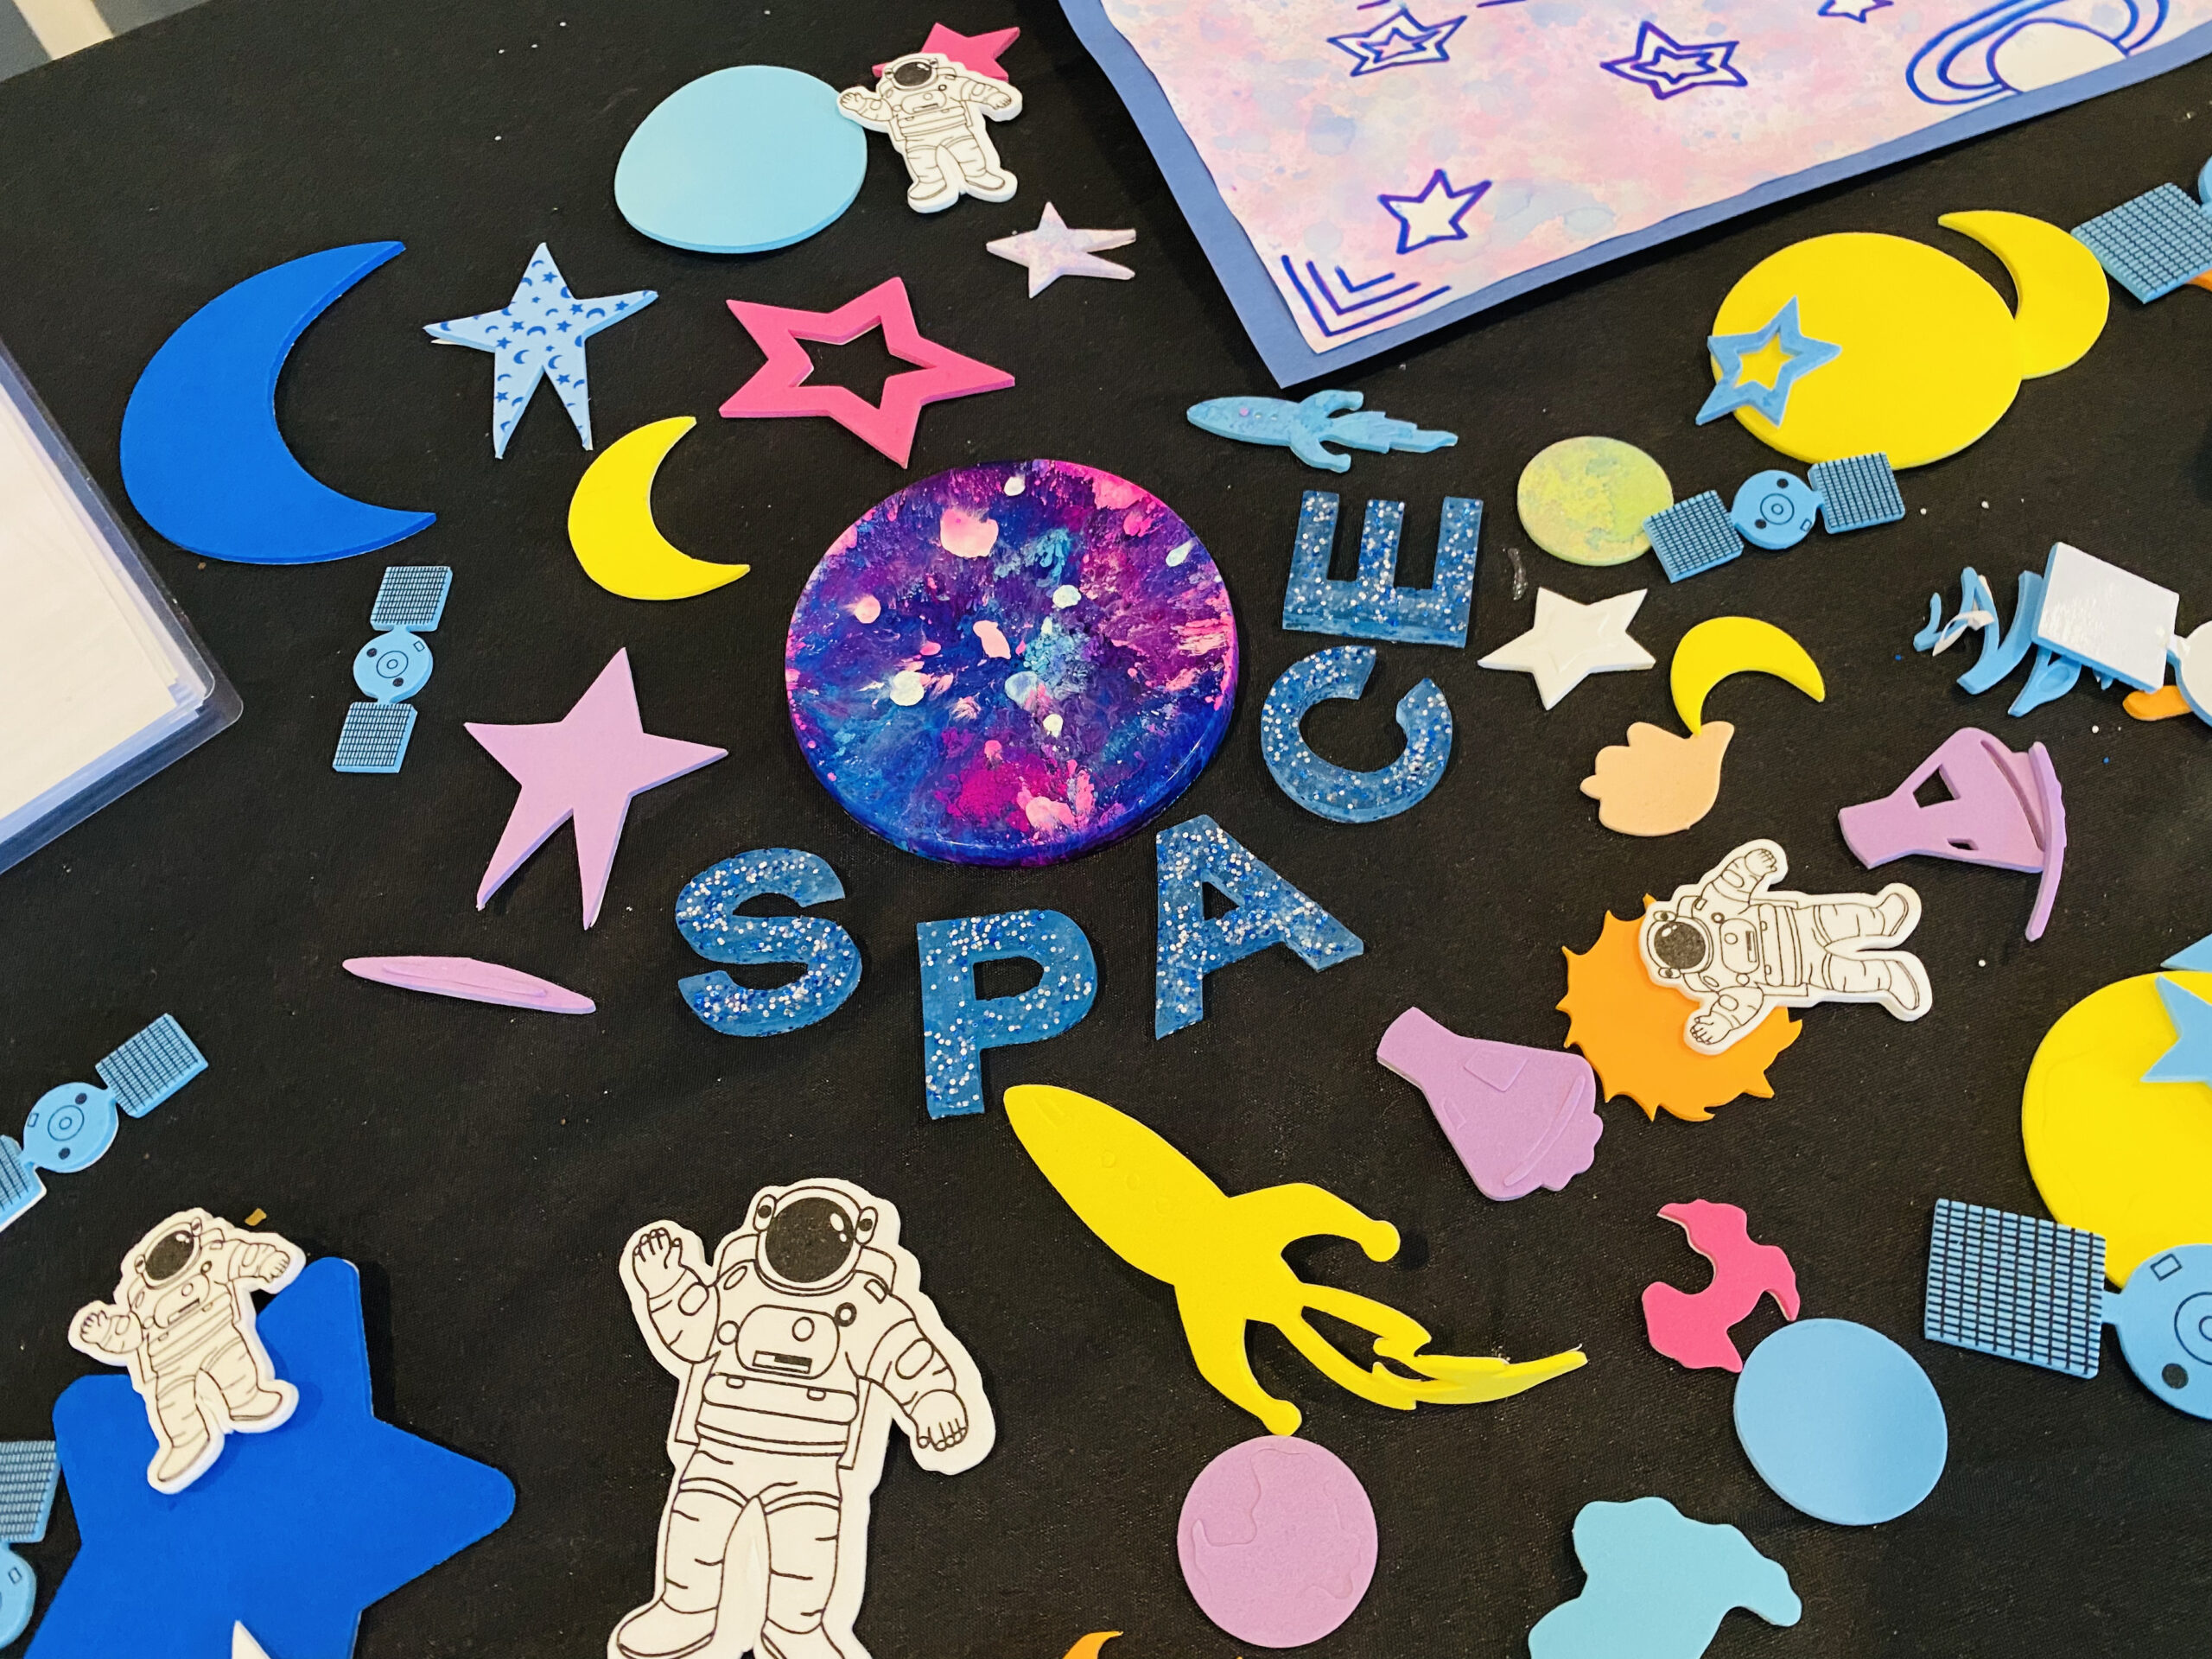 Splatter Painting: Here is a fun art lesson to include in your Outer Space Unit. Let's learn about our Galaxy while incorporating Splatter Painting and Graffiti Art.